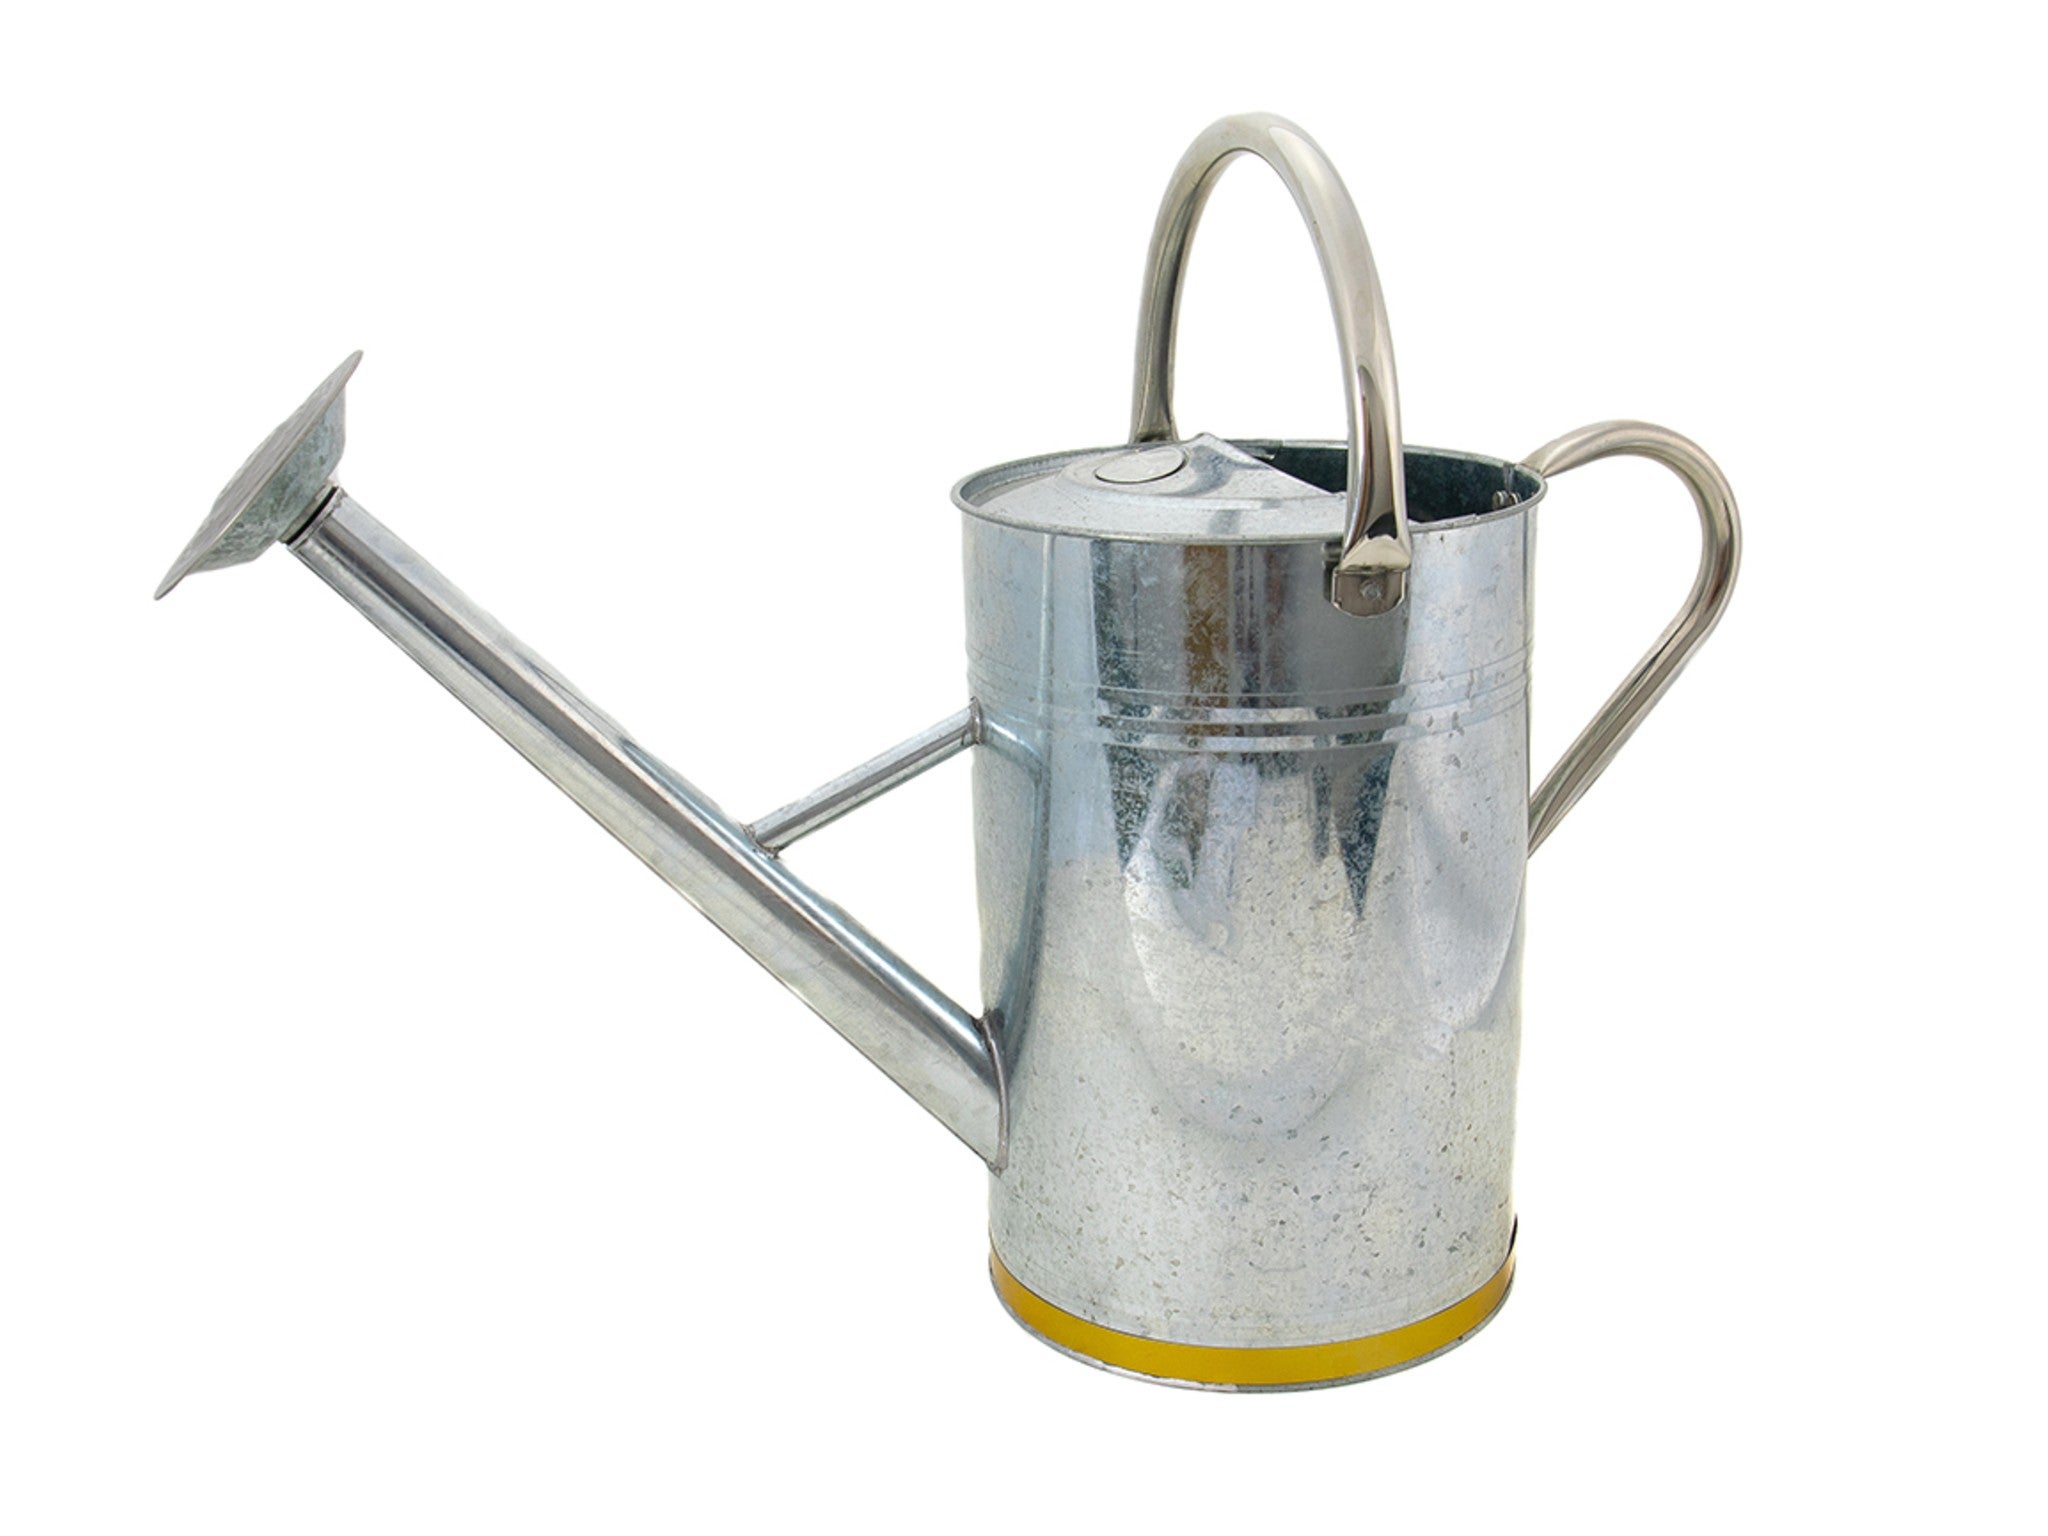 HEAVY DUTY GALV.METAL 10 LITER CAPACITY WATERING CAN-BRAND NEW 